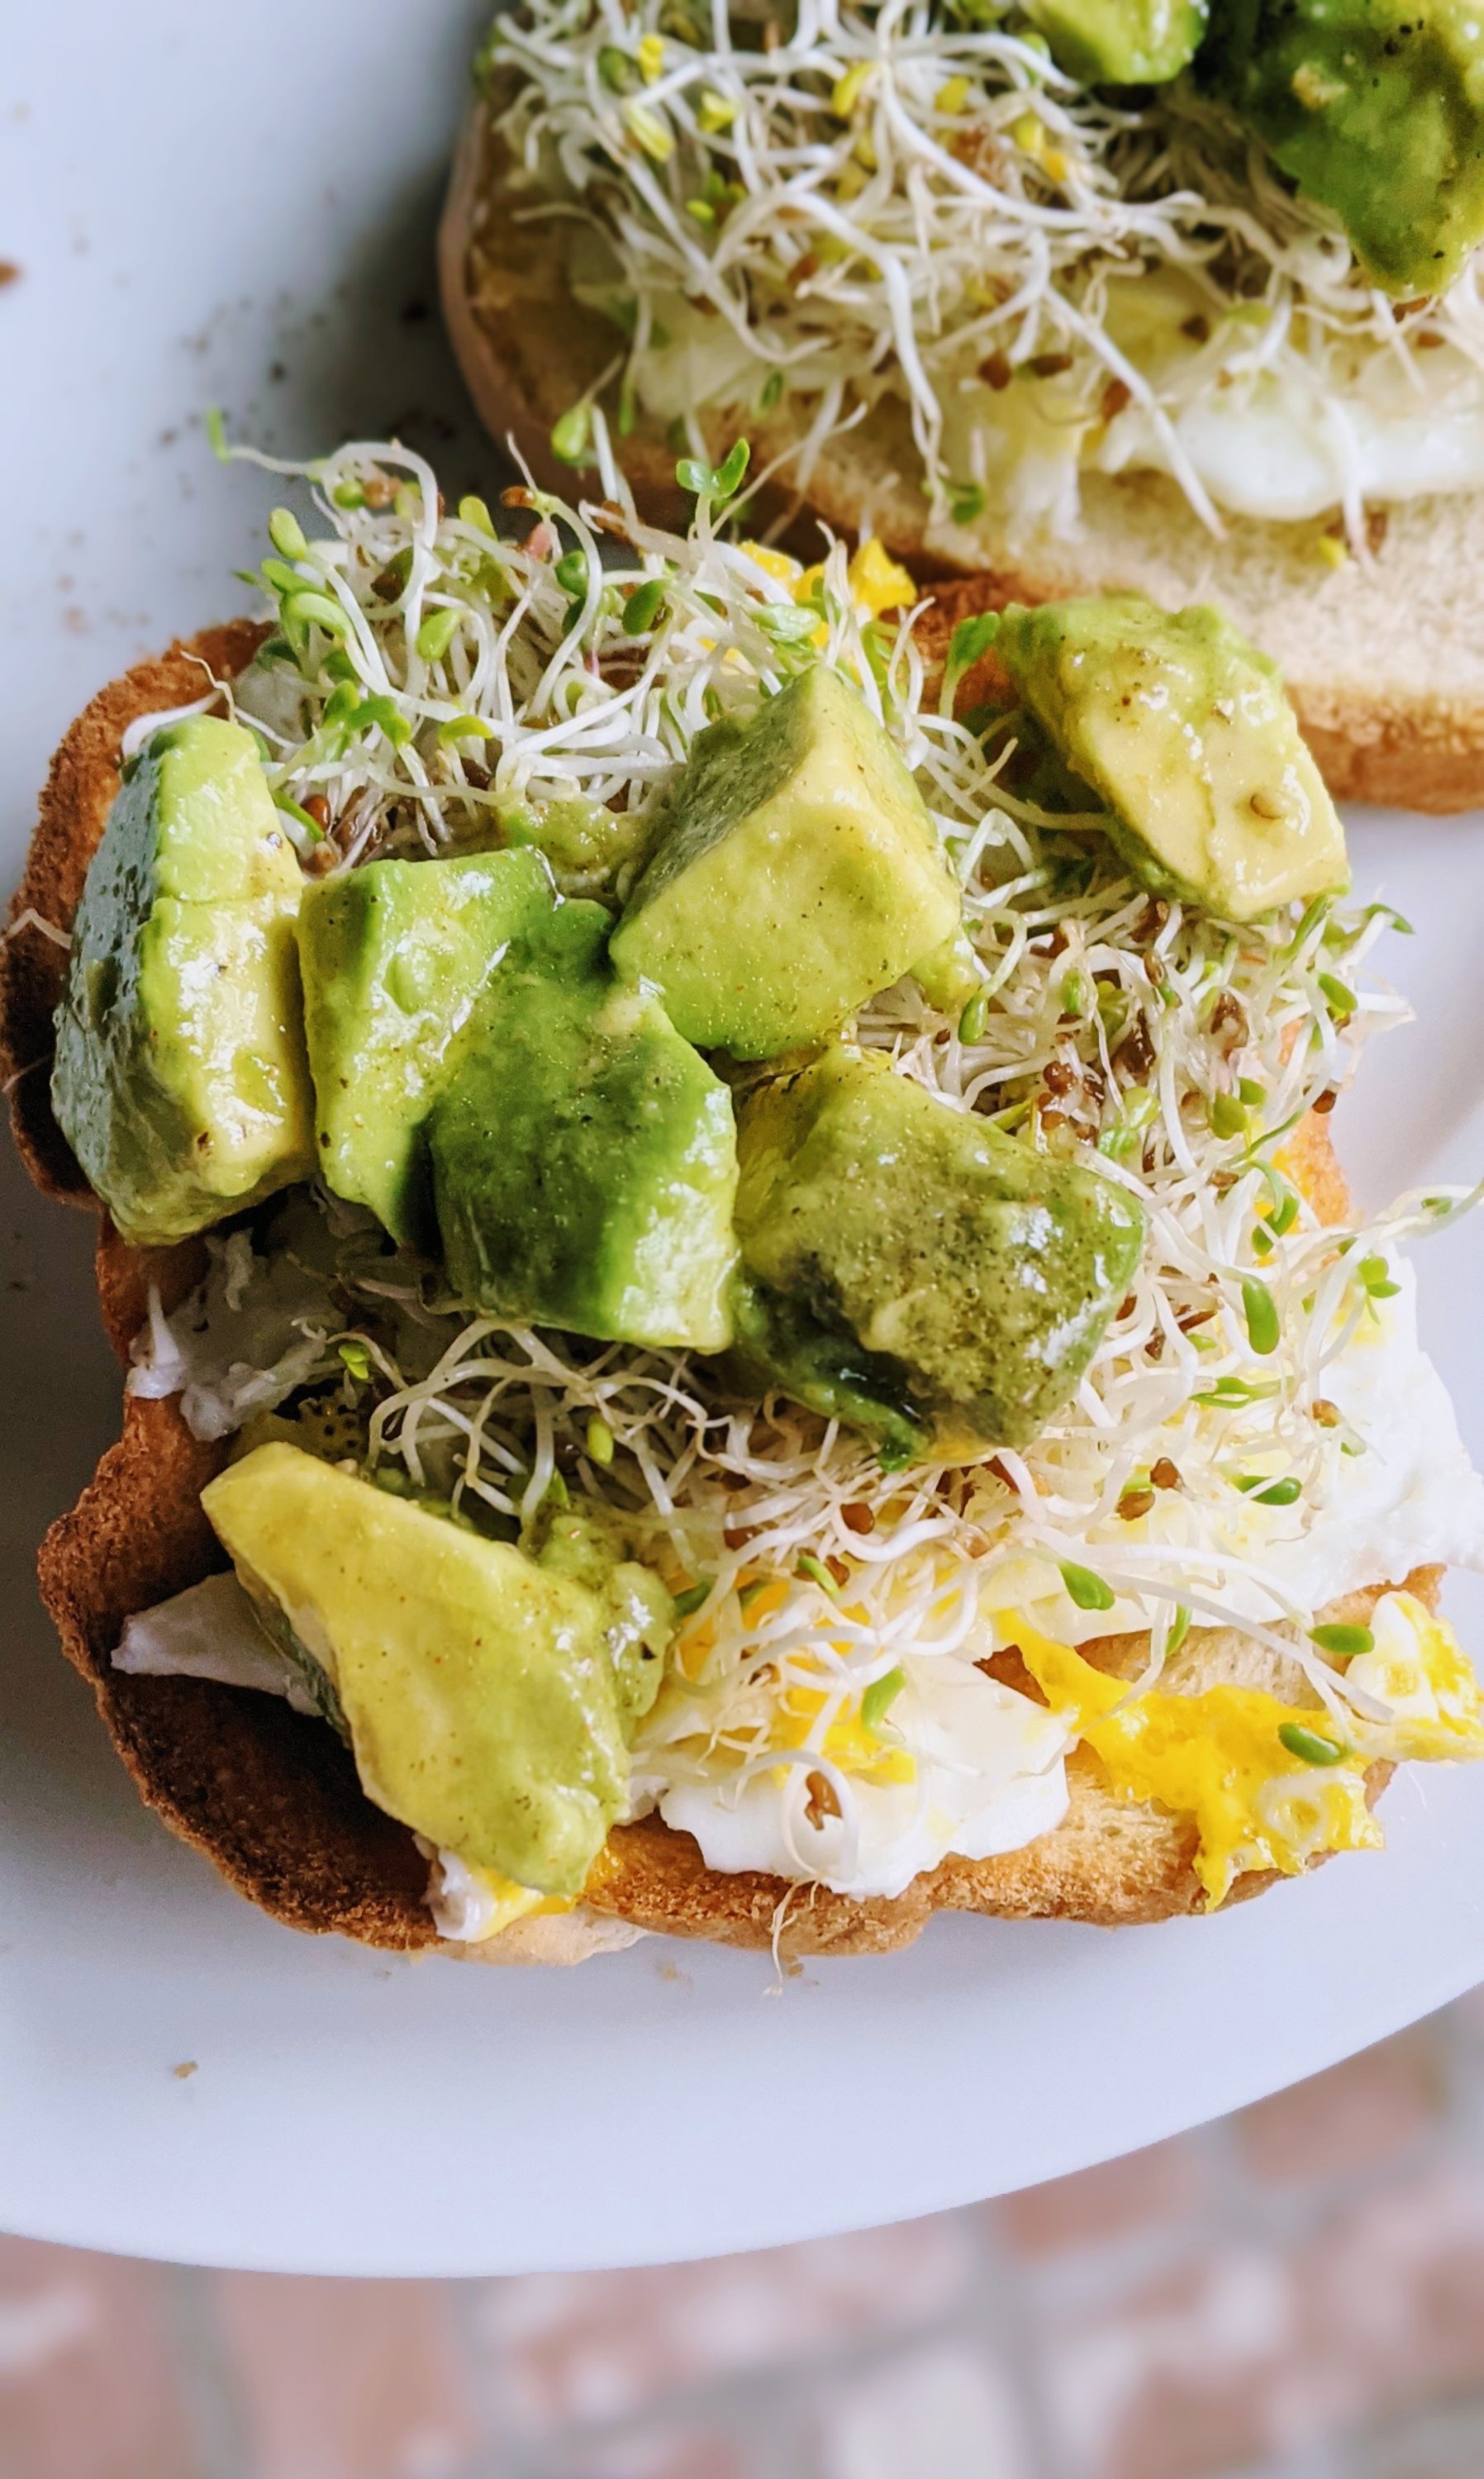 gluten free smashed egg and avocado sandwich recipe healthy brunch sandwiches gluten free breakfast ideas with avocado salad toast recipes and sprouts